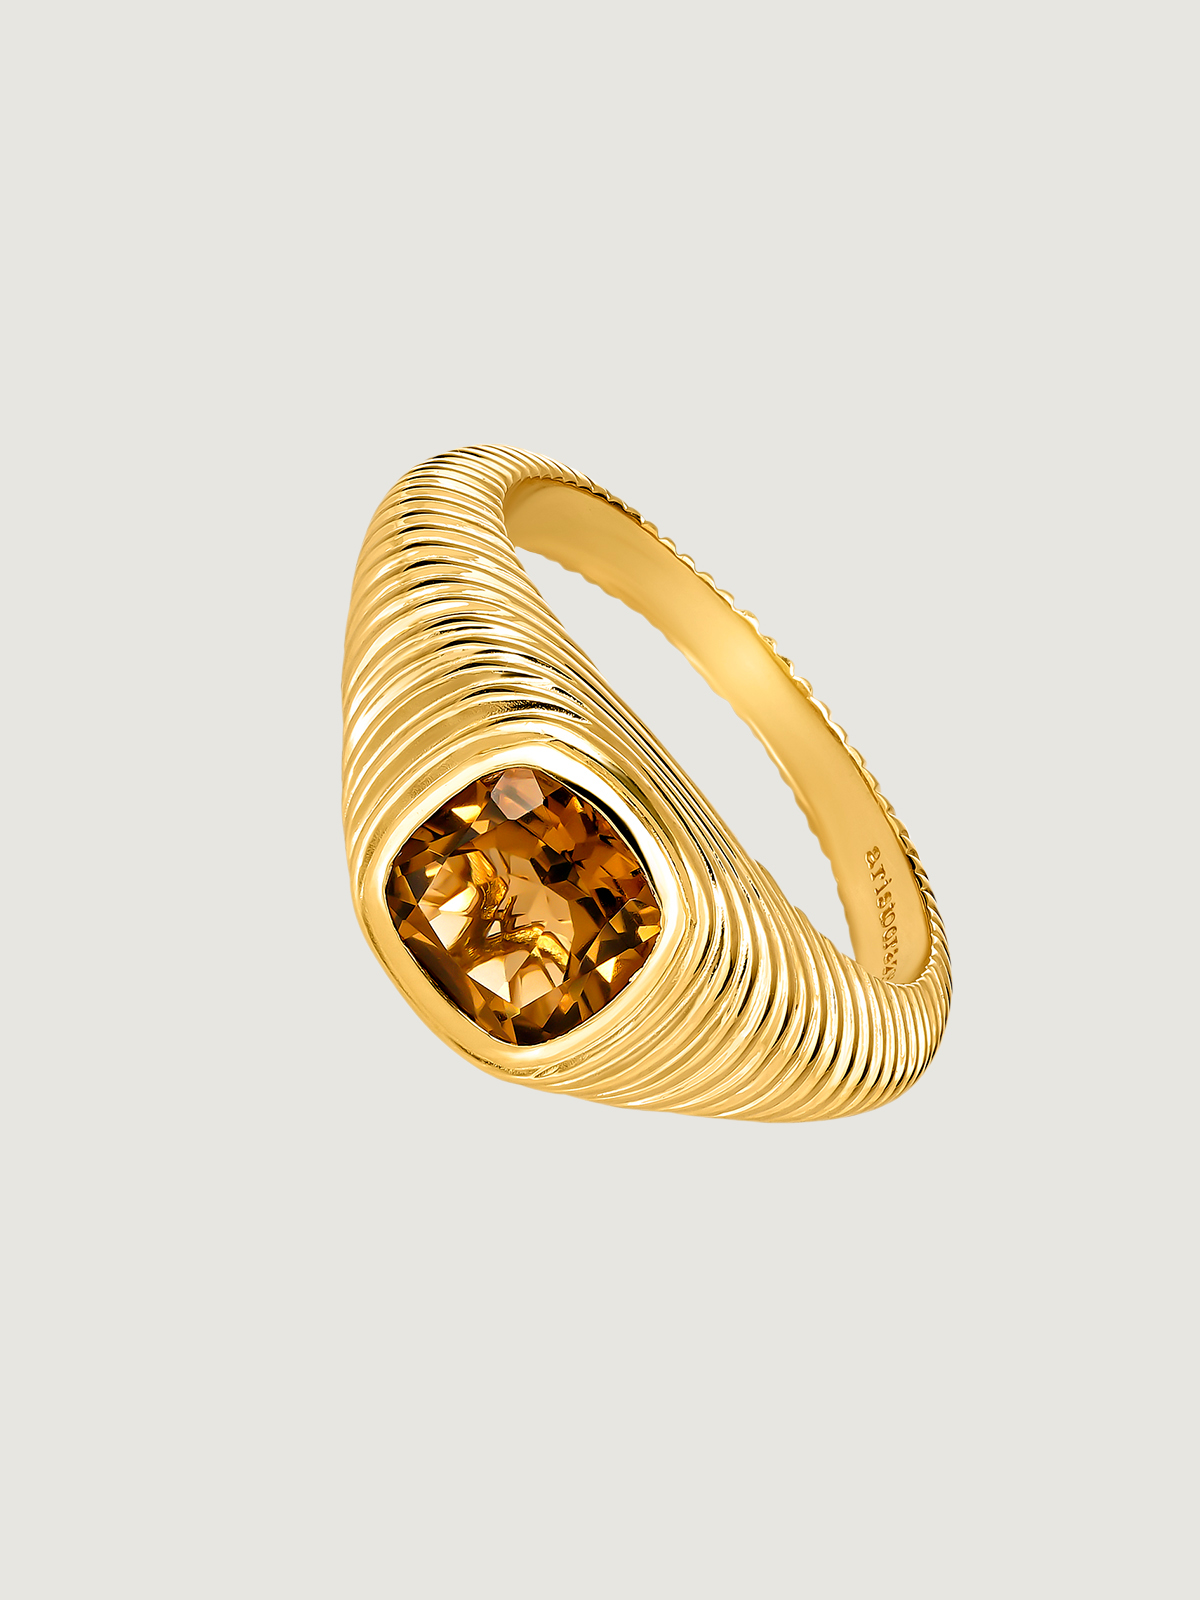 925 Silver signet ring bathed in 18K yellow gold with brown quartz and fluted texture.